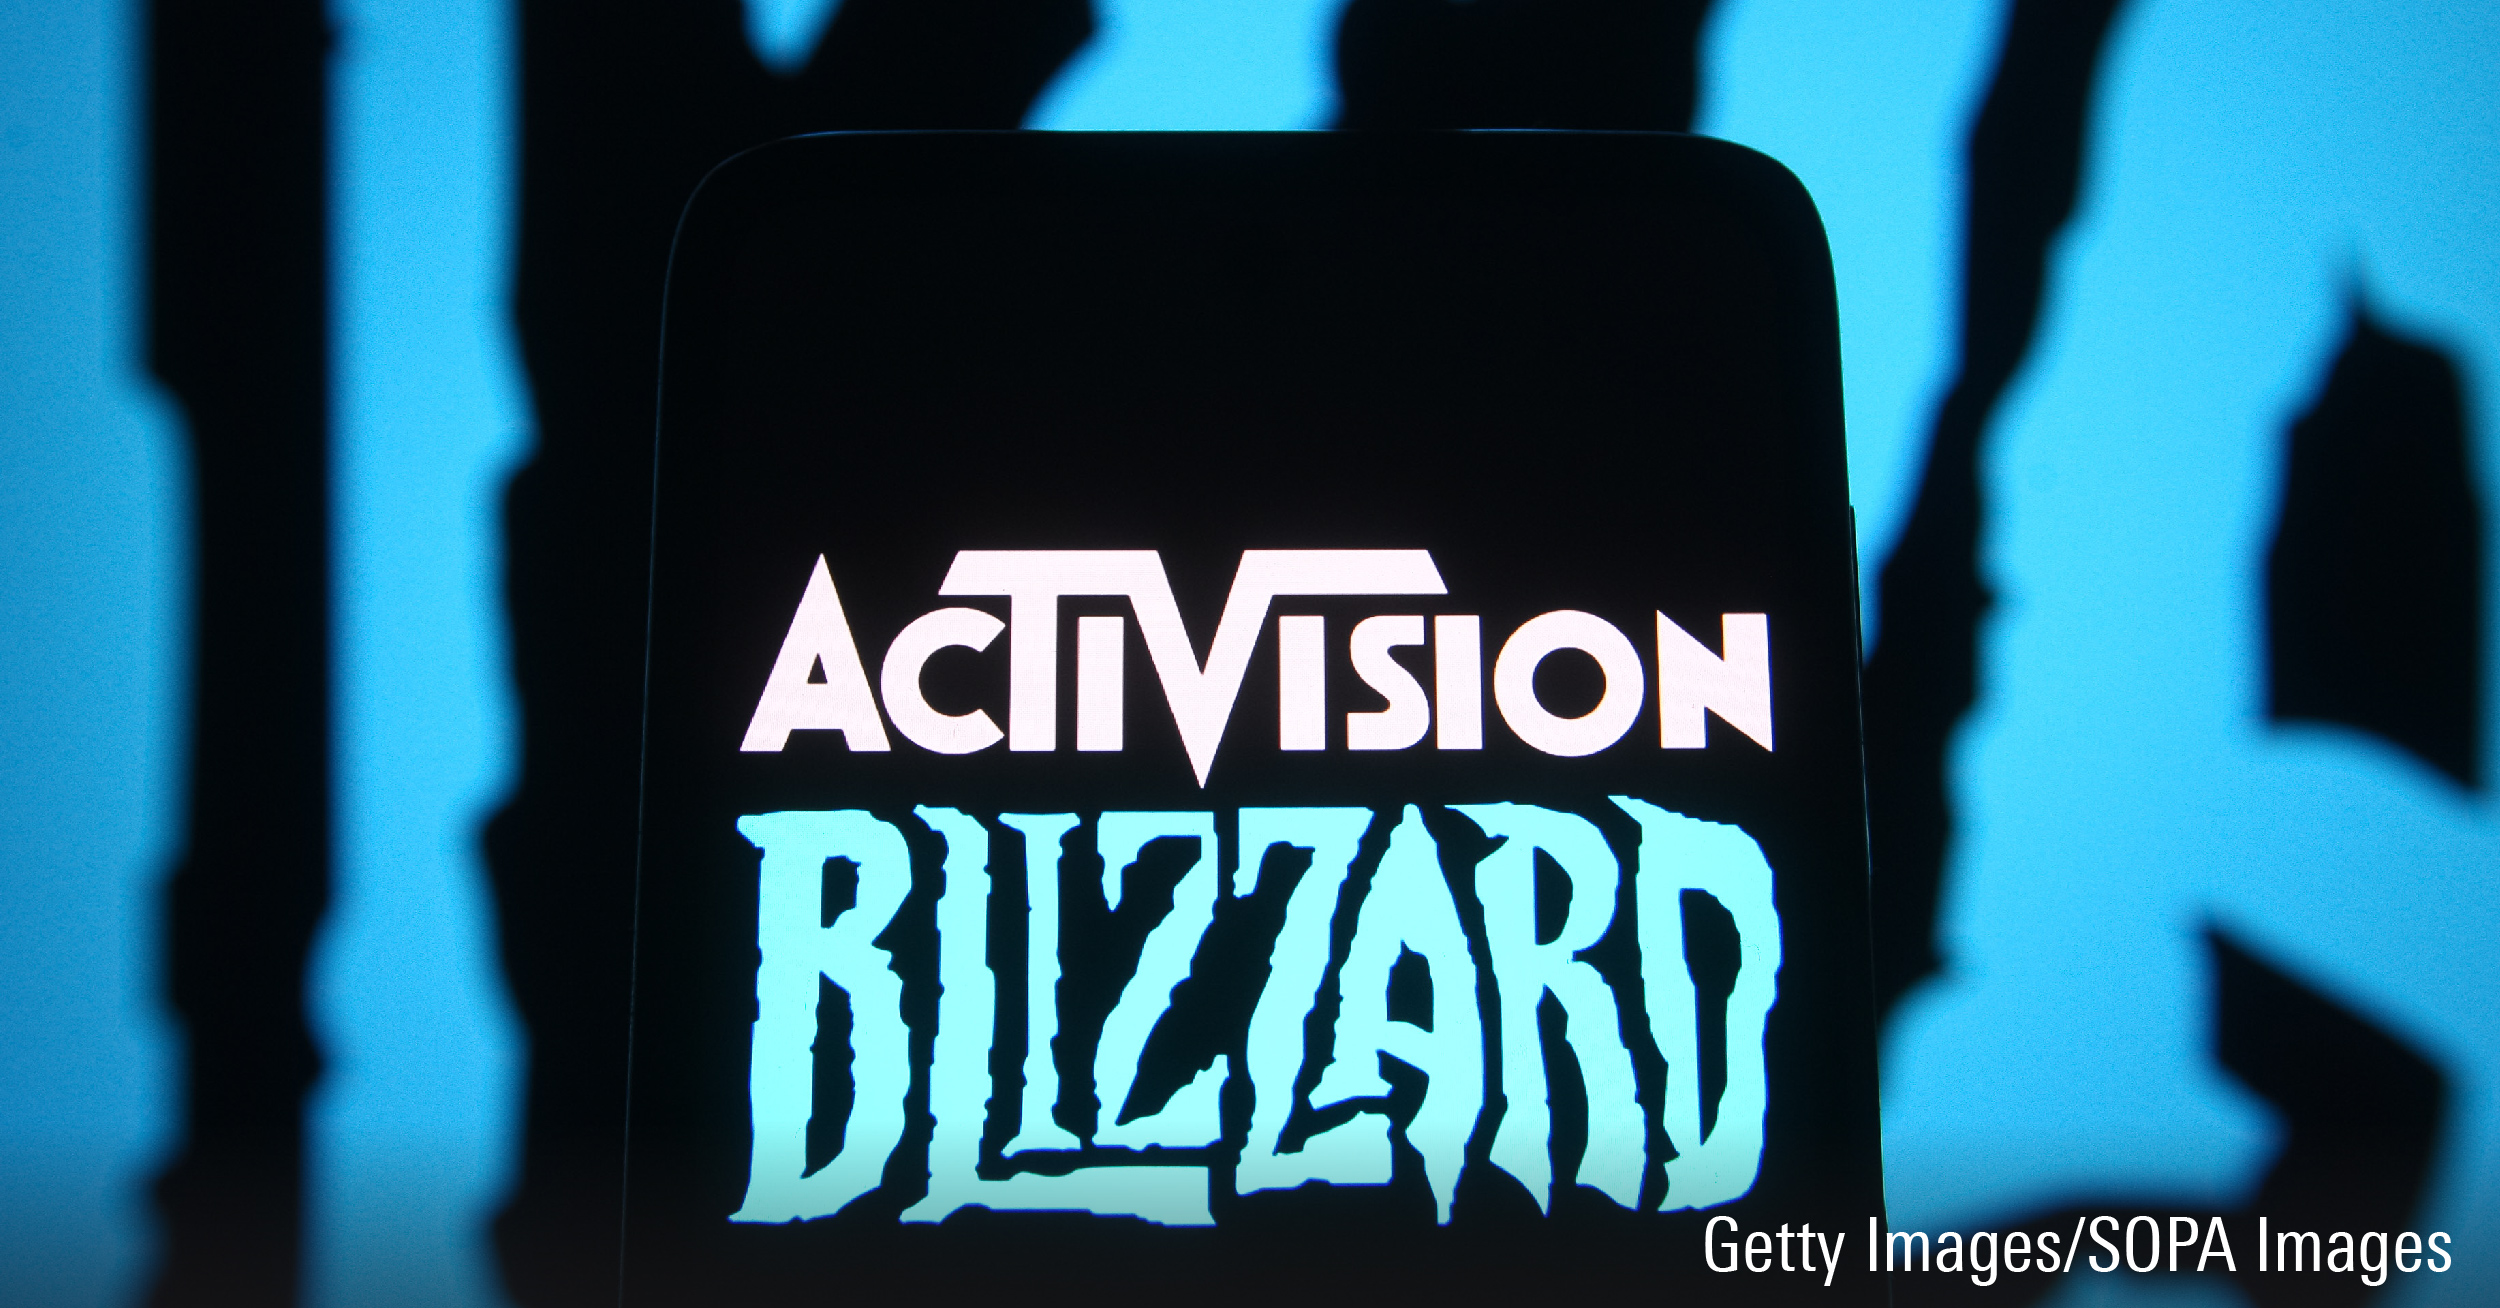 In this photo, Activision Blizzard logo of a video game company is seen on a smartphone screen in front of Blizzard Entertainment logo.